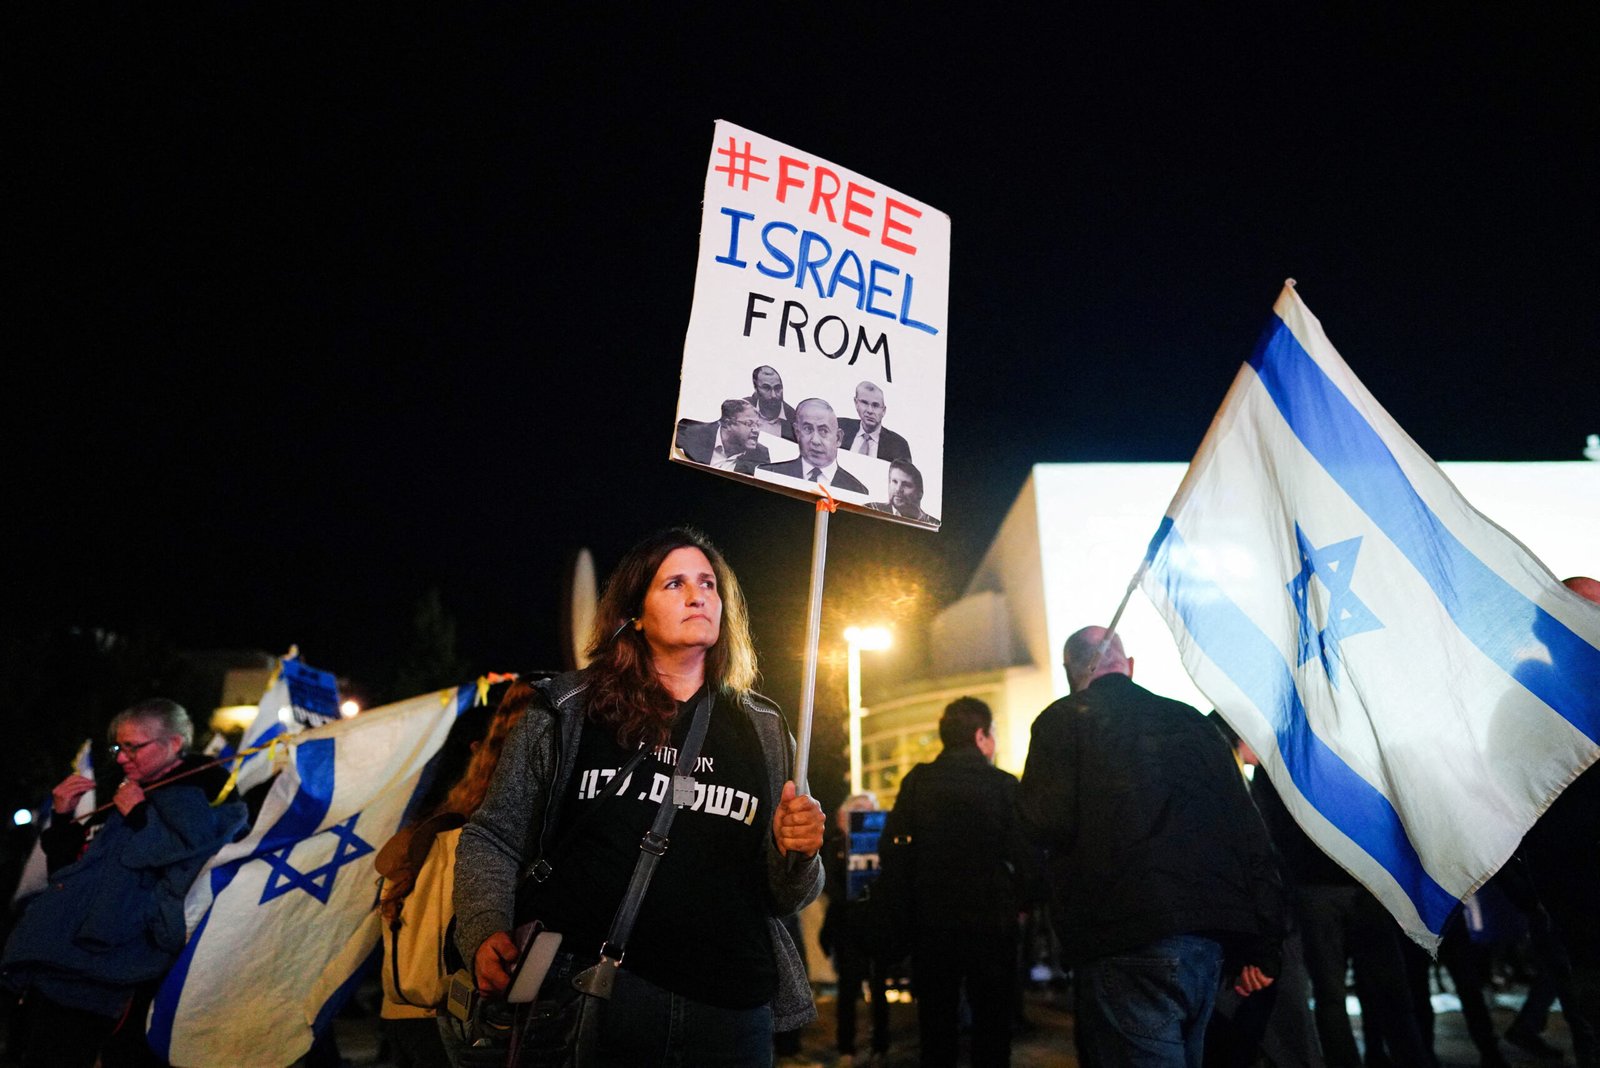 “Face Of Evil” Israeli Protesters Call For Early Polls To Oust PM Netanyahu